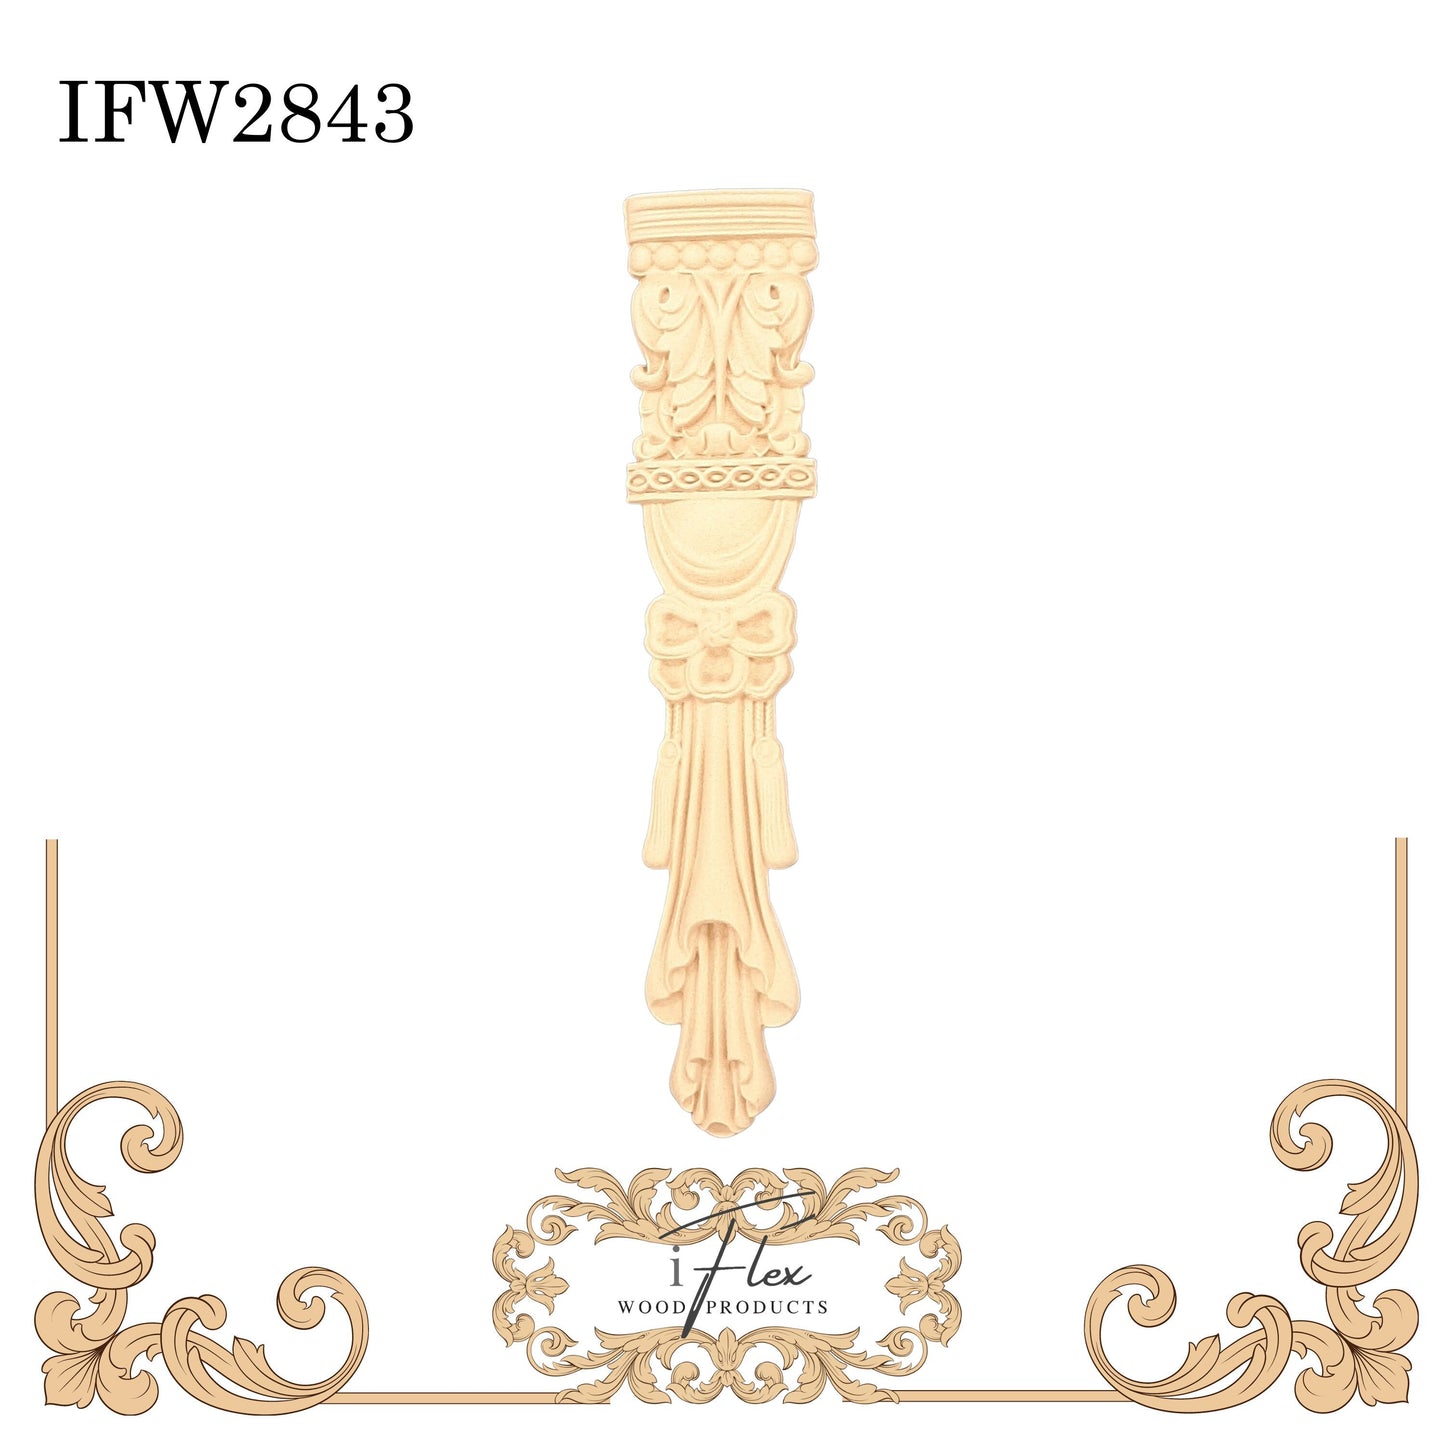 IFW 2843 iFlex Wood Products, bendable mouldings, flexible, wooden appliques, drop